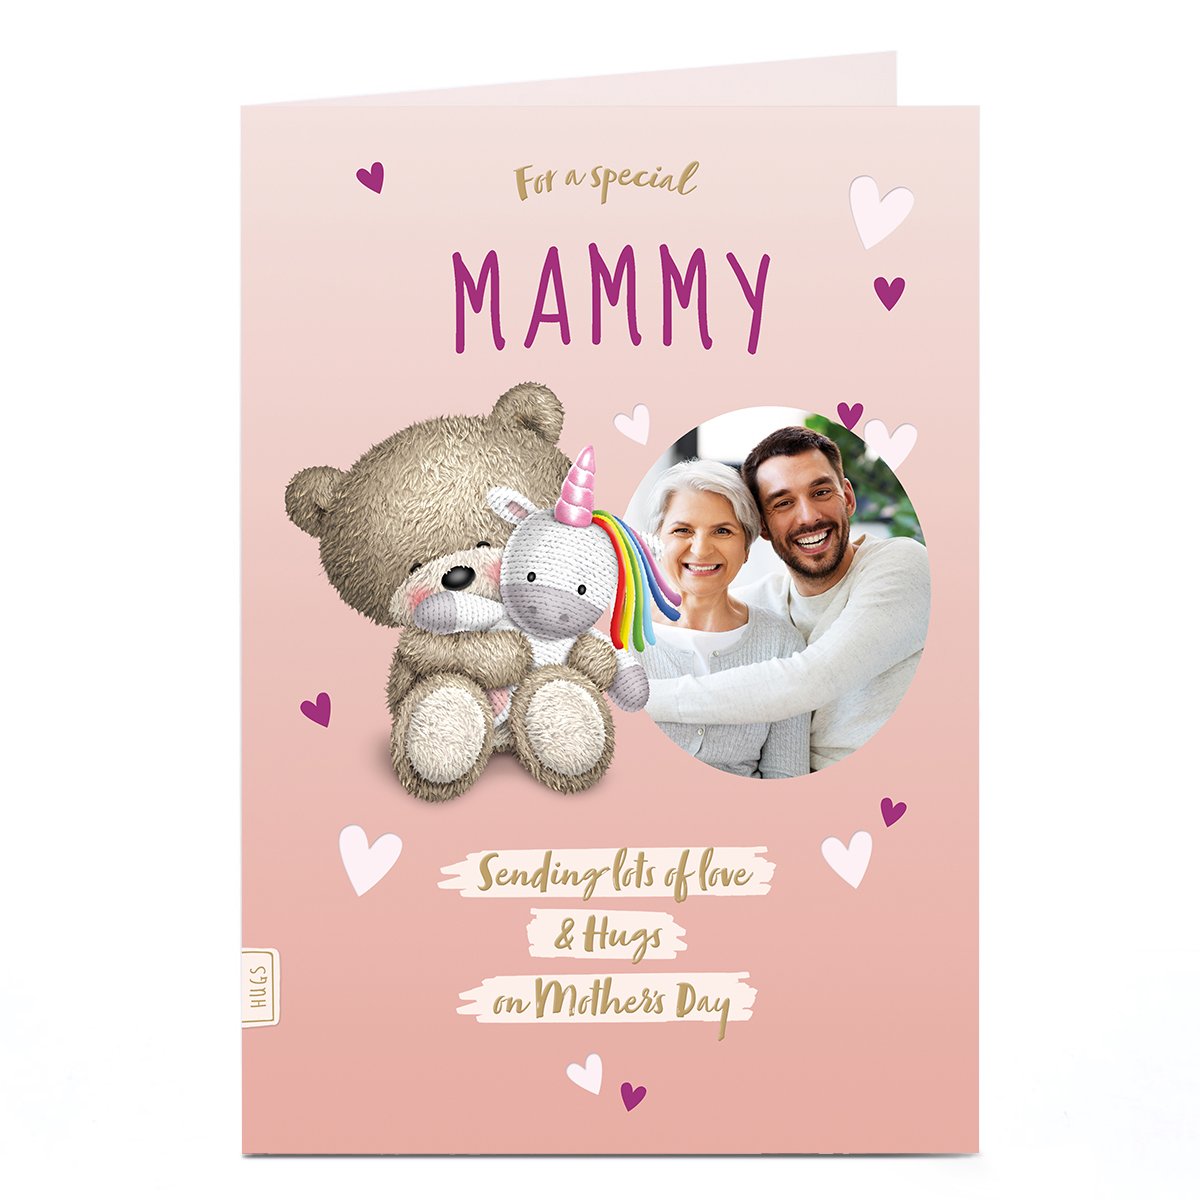 Photo Hugs Bear Mother's Day Card - Lots Of Love, Mammy